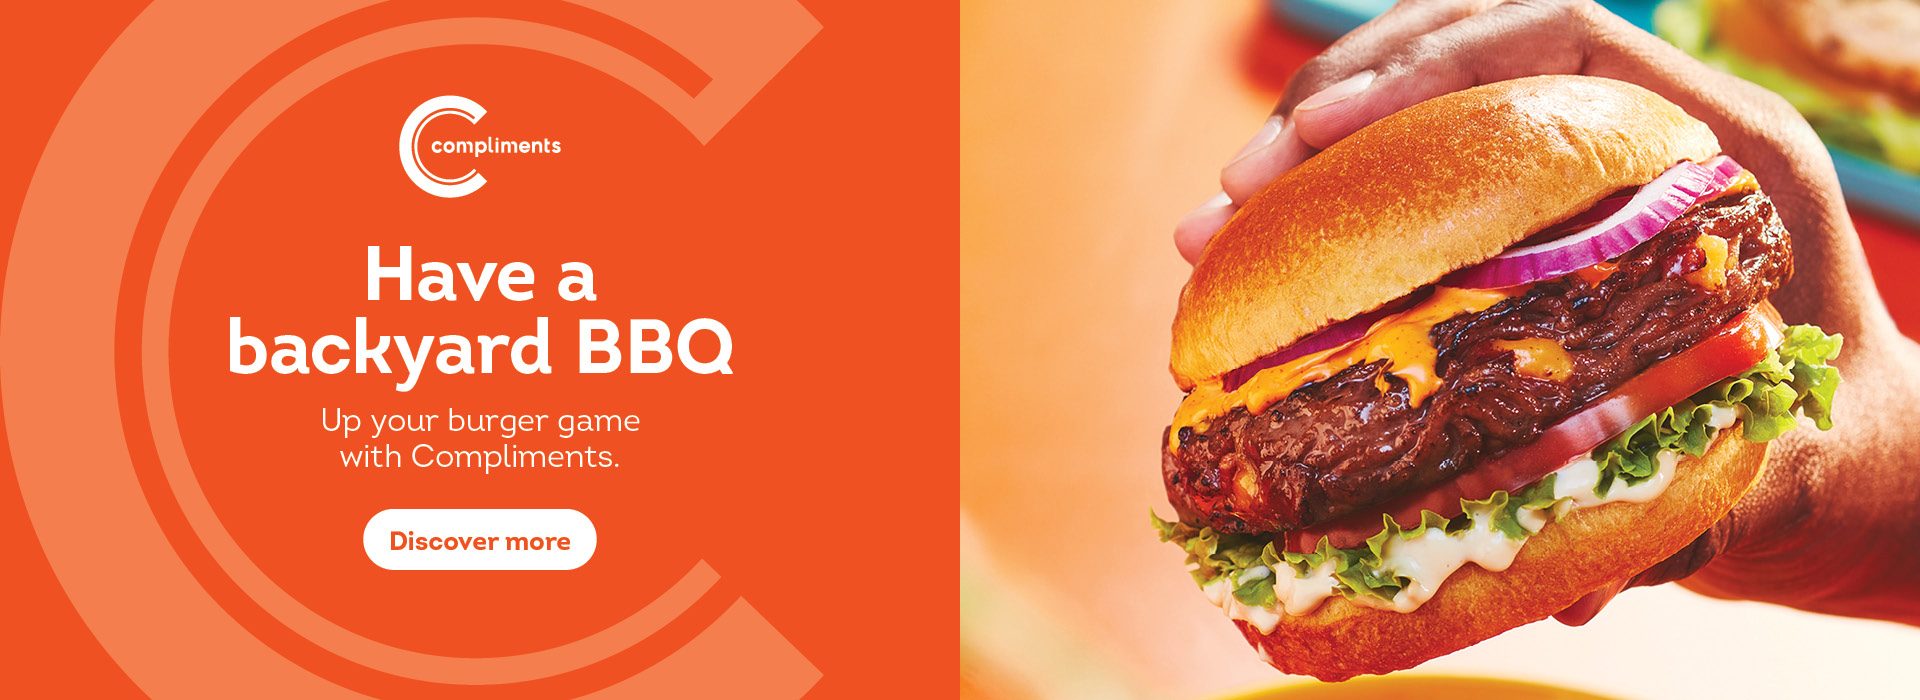 Text Reading "Have a Backyard BBQ. Up your burger game with Compliments.Click on 'Discover More' Button to learn more" On the right side, a hand is shown holding a large hamburger.